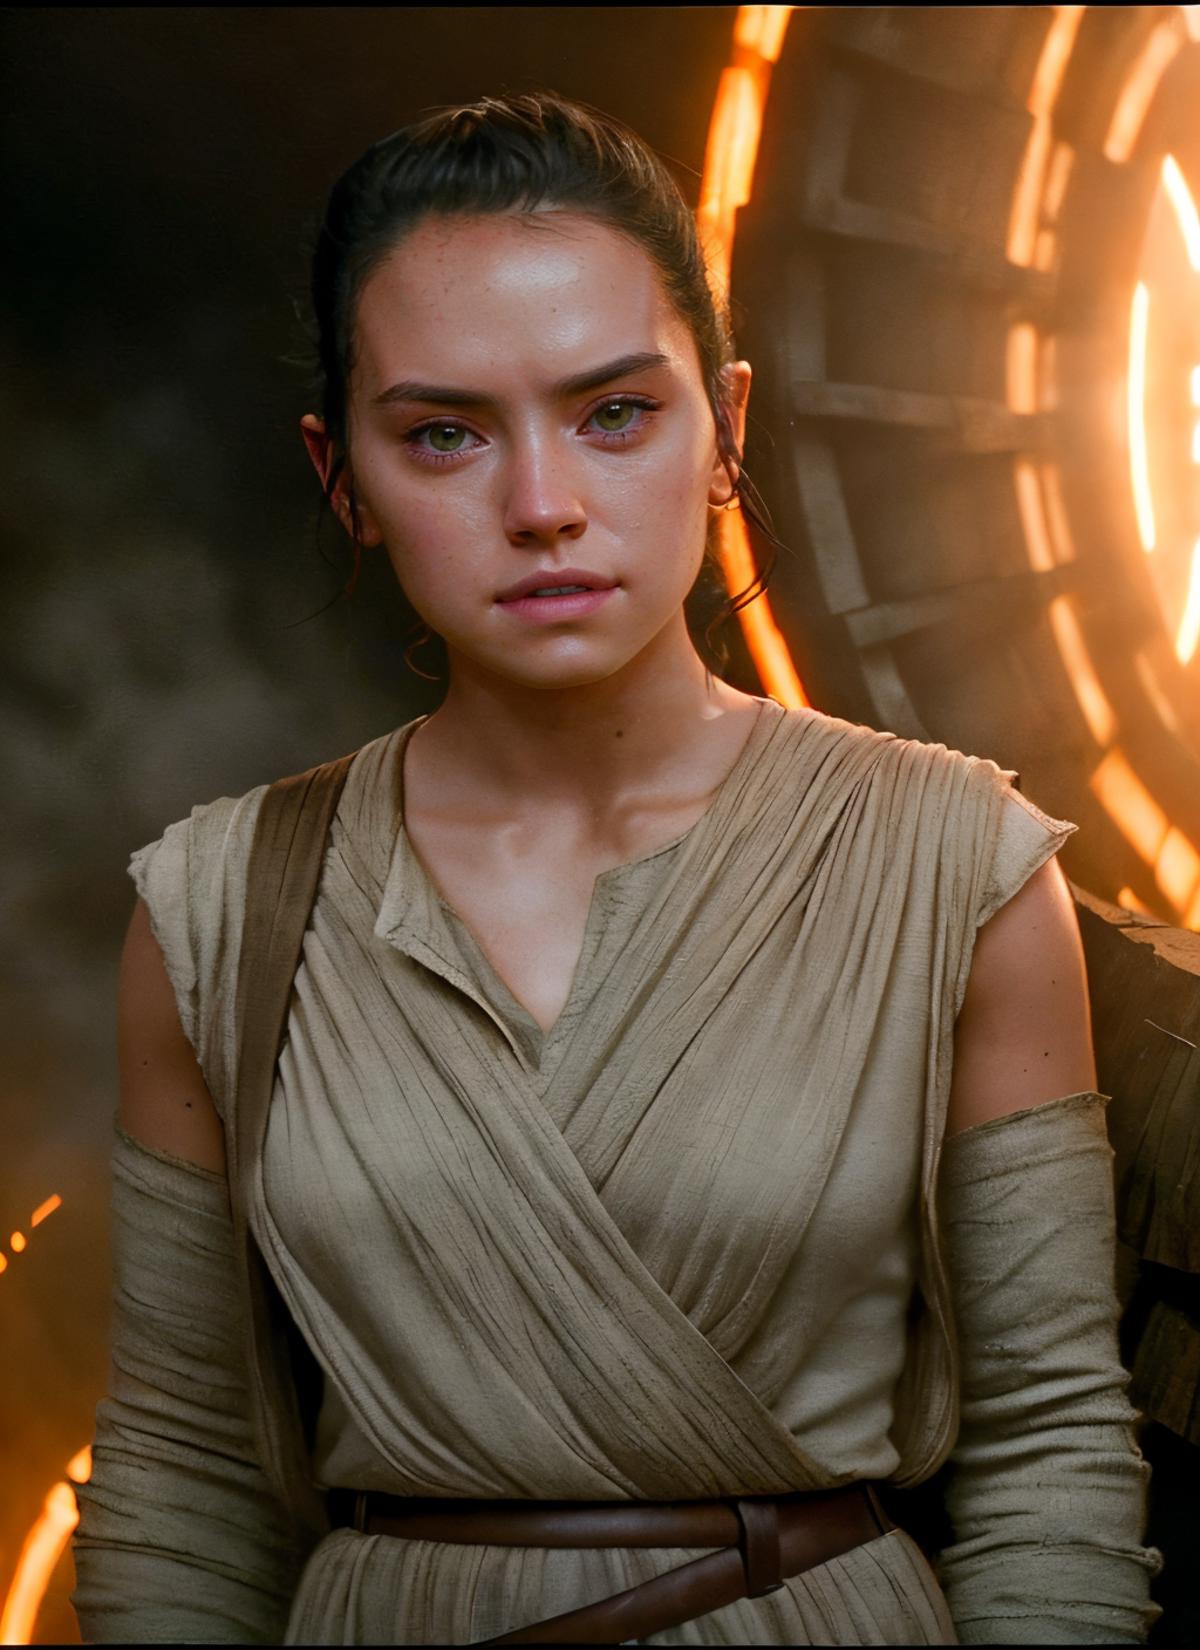 Rey from Star Wars (Daisy Ridley) image by astragartist